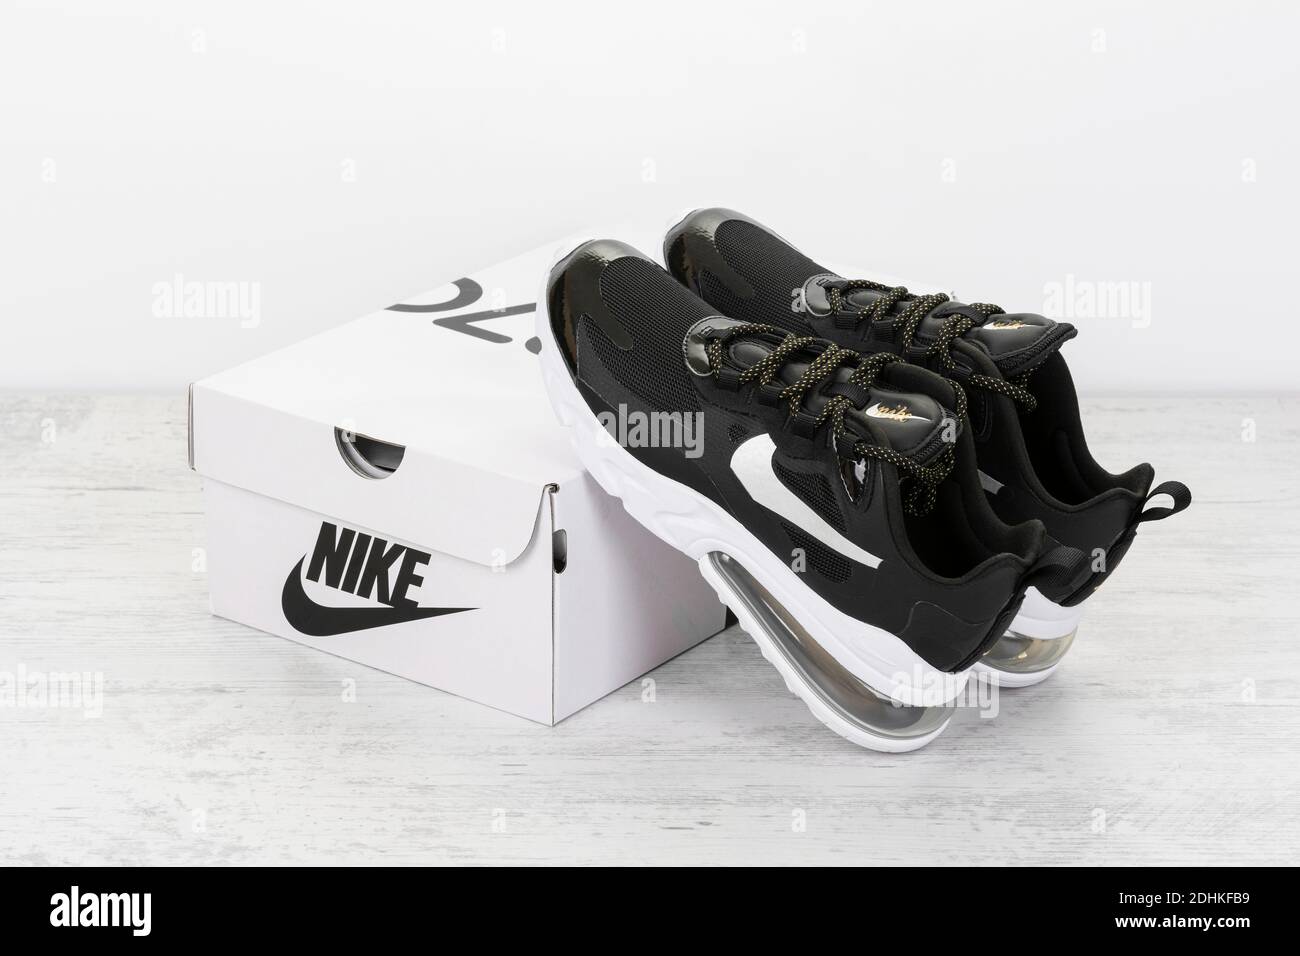 BURGAS, BULGARIA - DECEMBER 8, 2020: Nike Air MAX 270 REACT women's shoes - sneakers in black, on white wooden background. Stock Photo